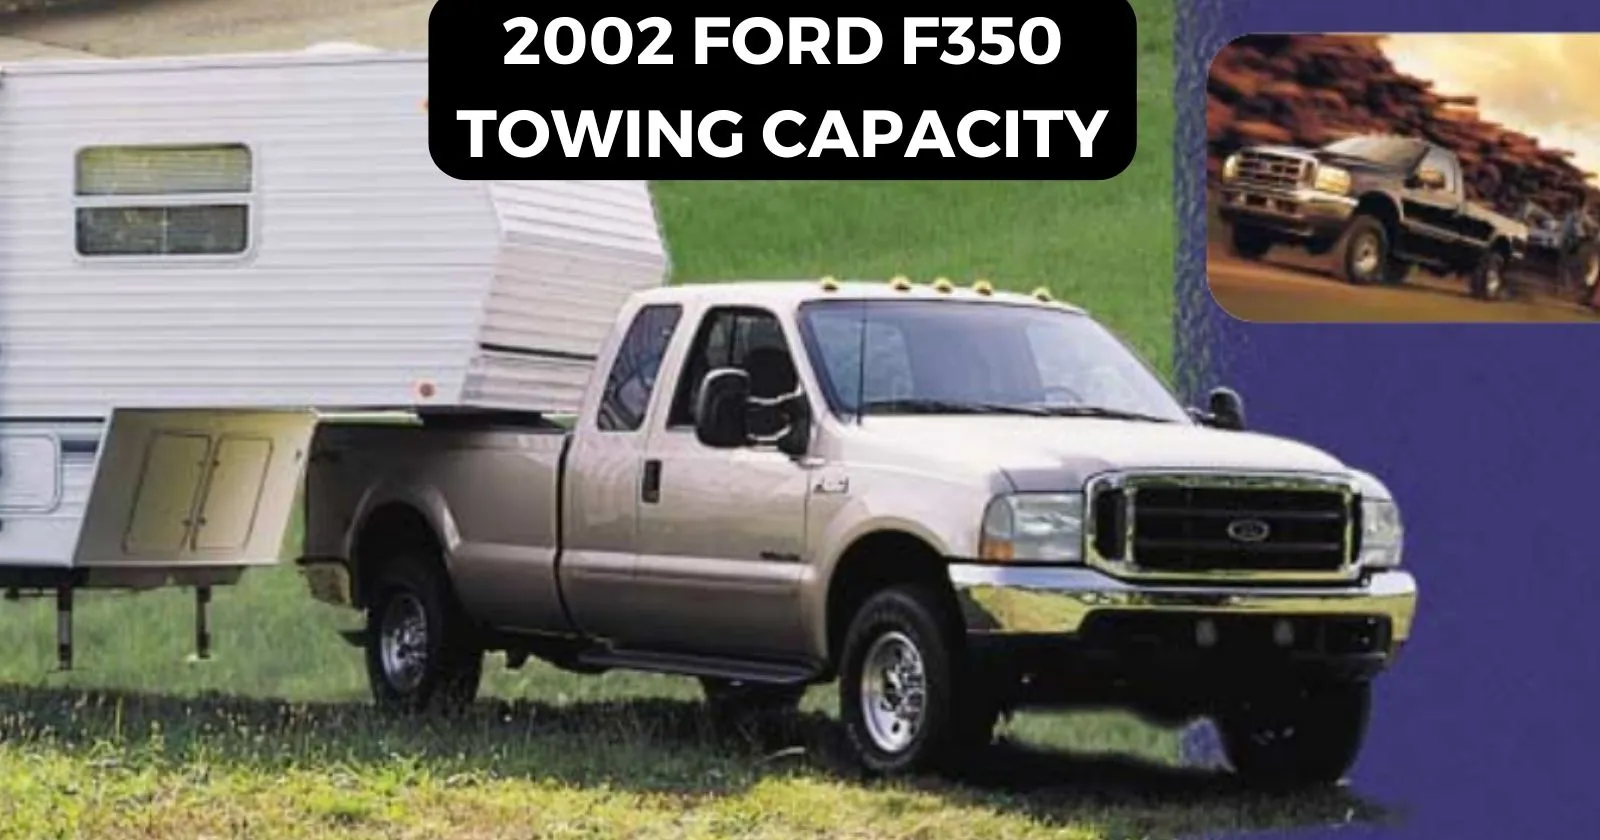 explore-2002-ford-f350-towing-capacity-chart-thecartowing